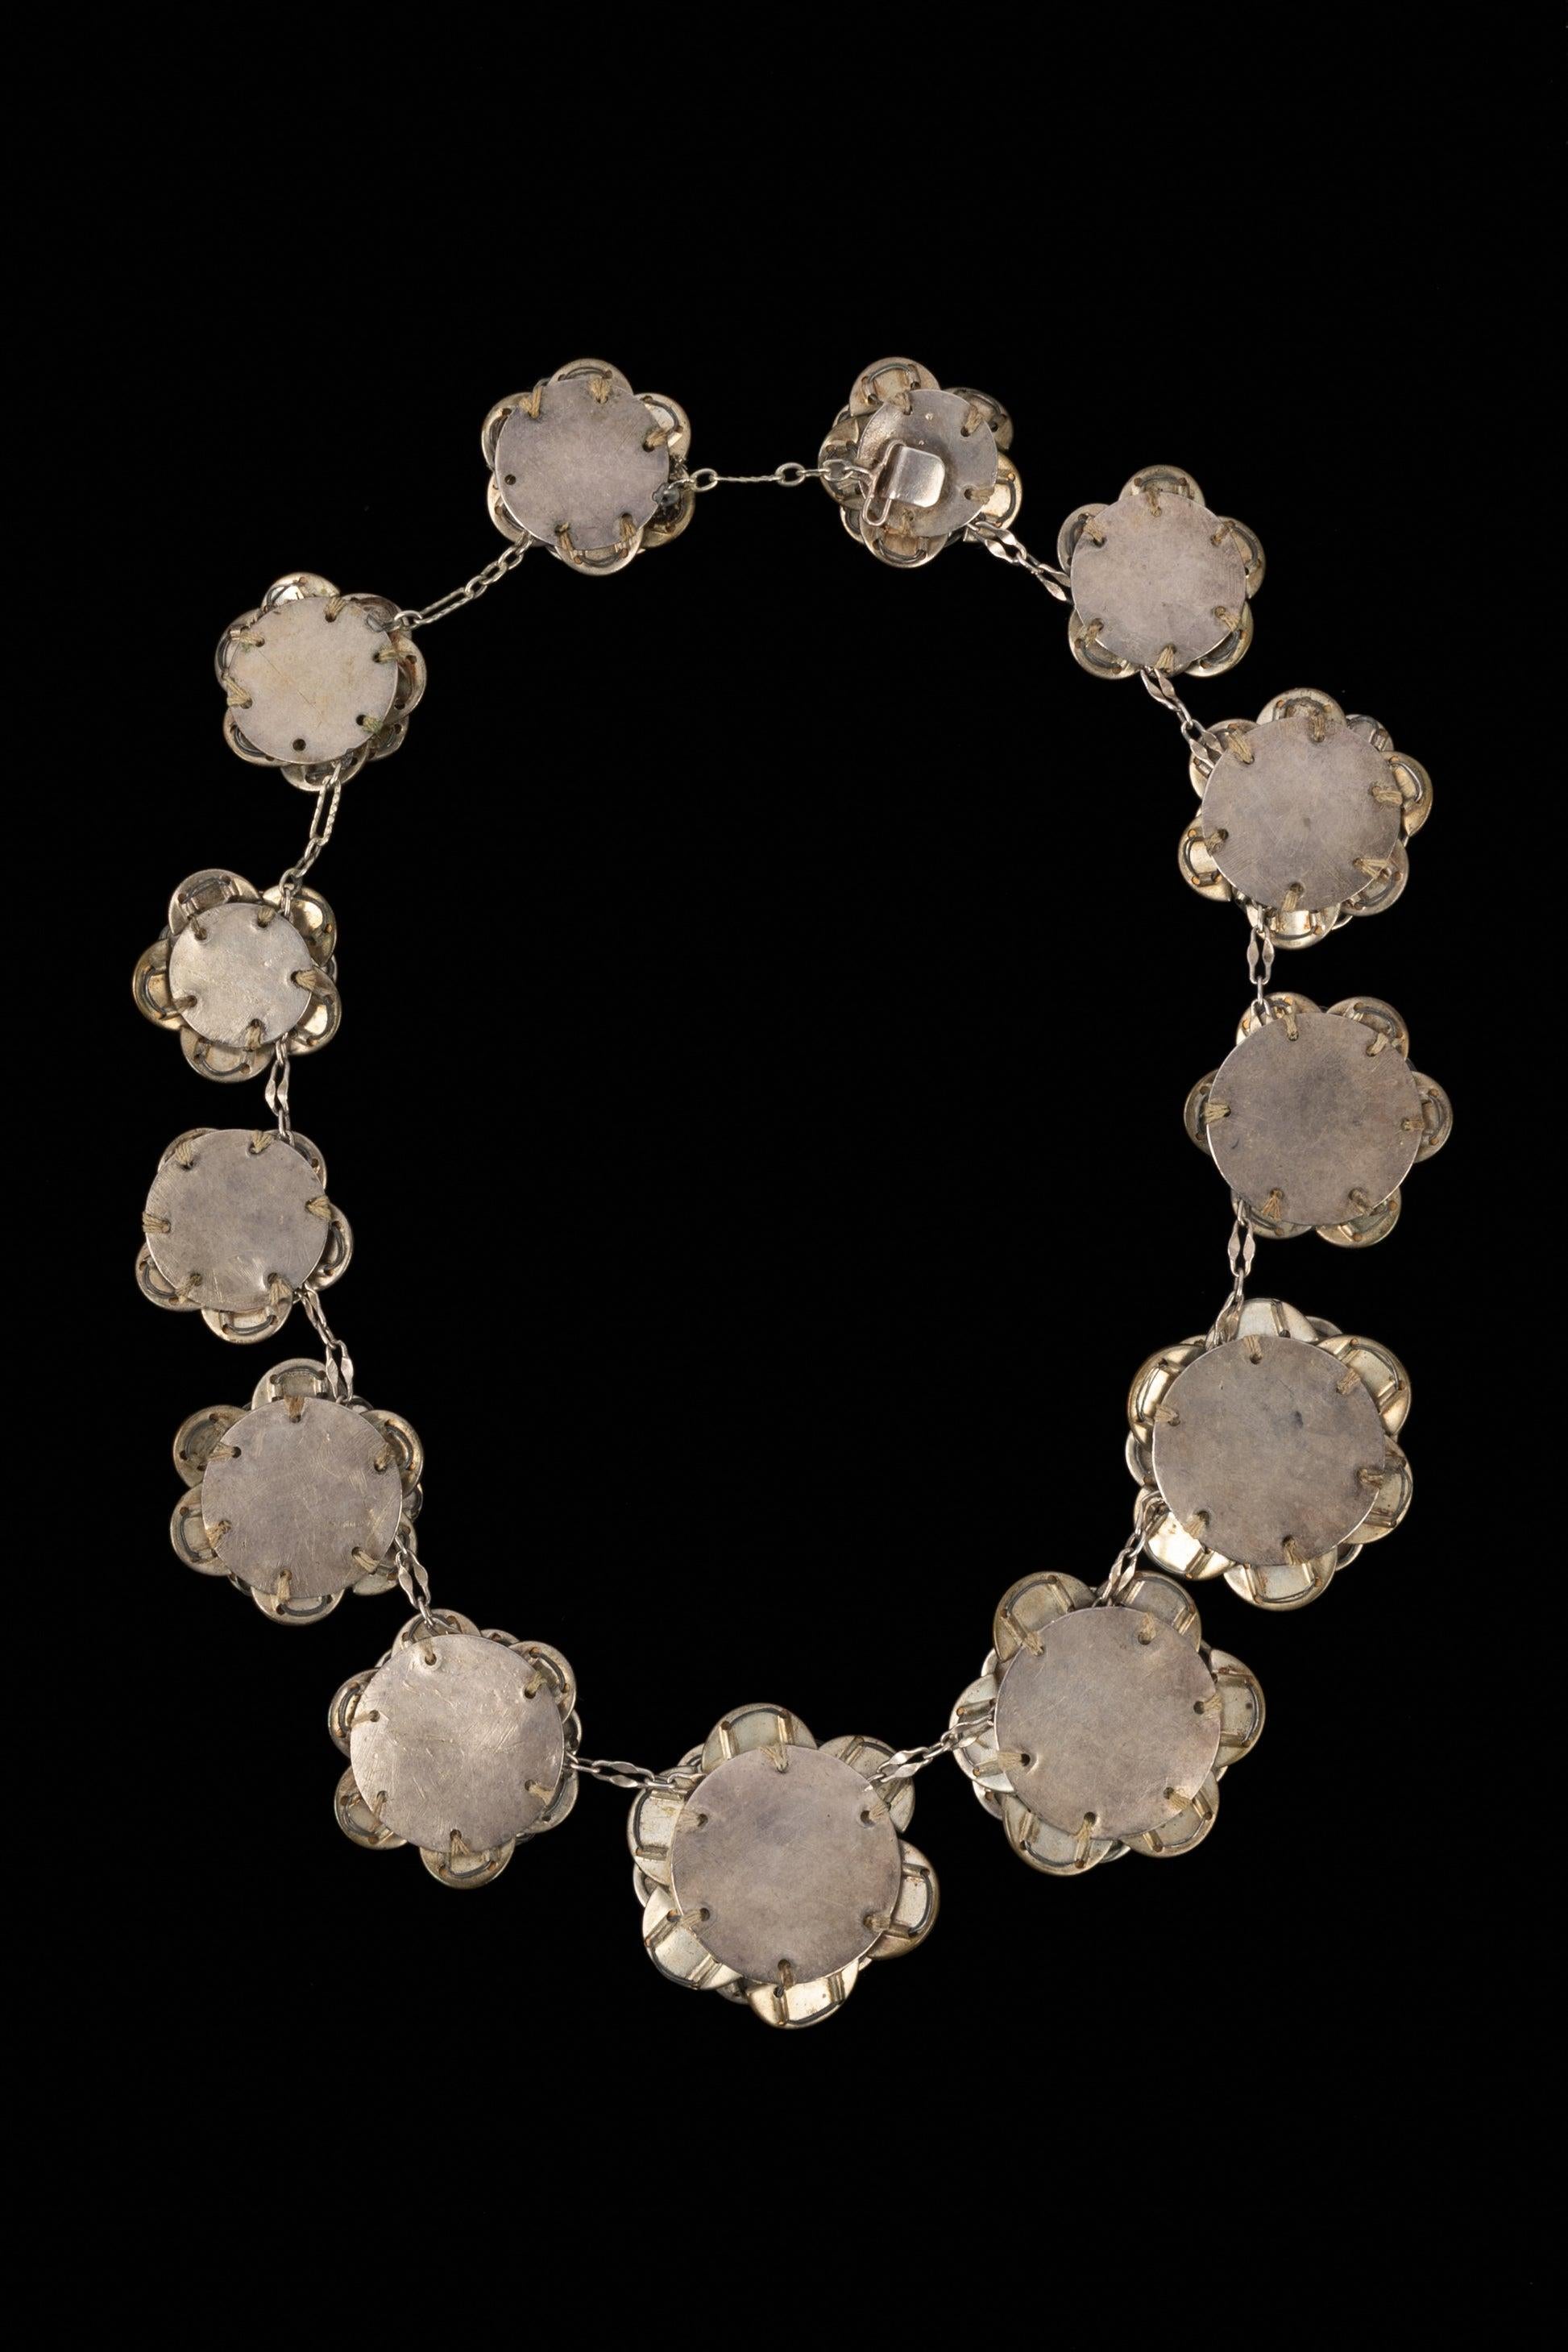 Chanel - Necklace composed of rhinestone semicircles assembled in a rose shape on silvery metal circles, the whole following an 